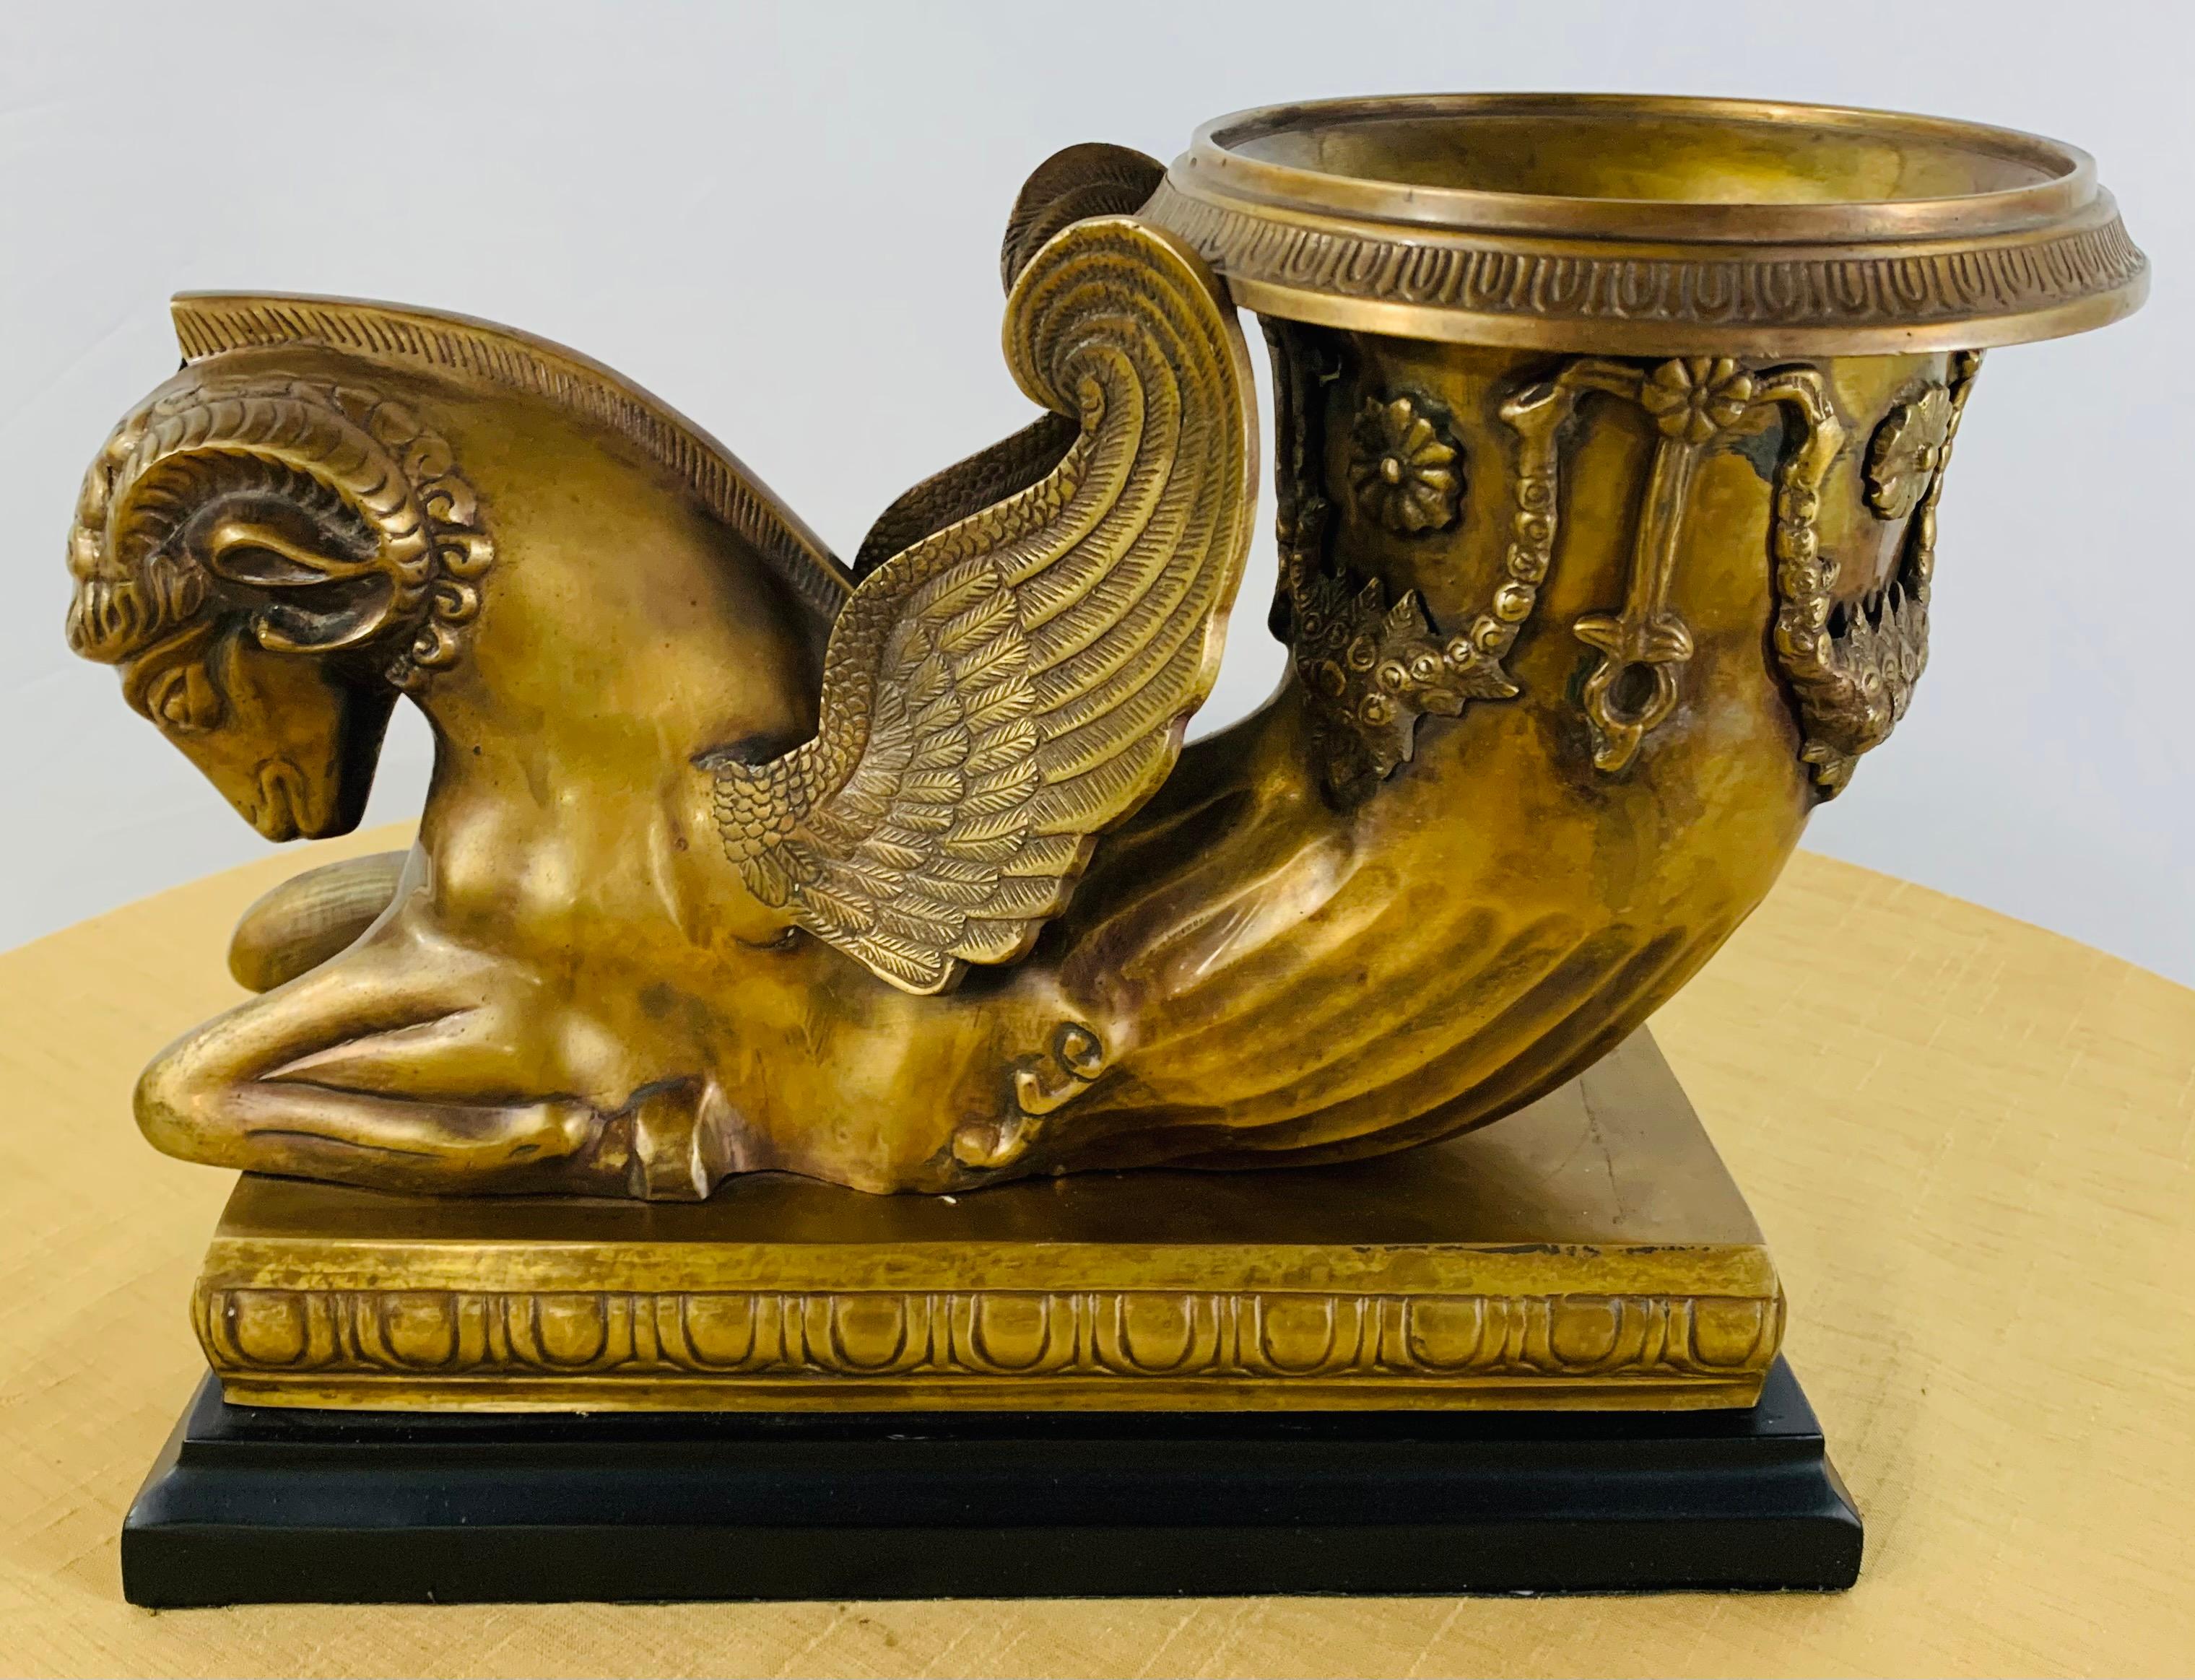 A stunning early 20th century sculpture of rython form terminating in a winged ram. The sculpture features intricate design of flowers on the rython and fine sculpting on the ram wings. The statue seats on a rectangular black metal base.
A one of